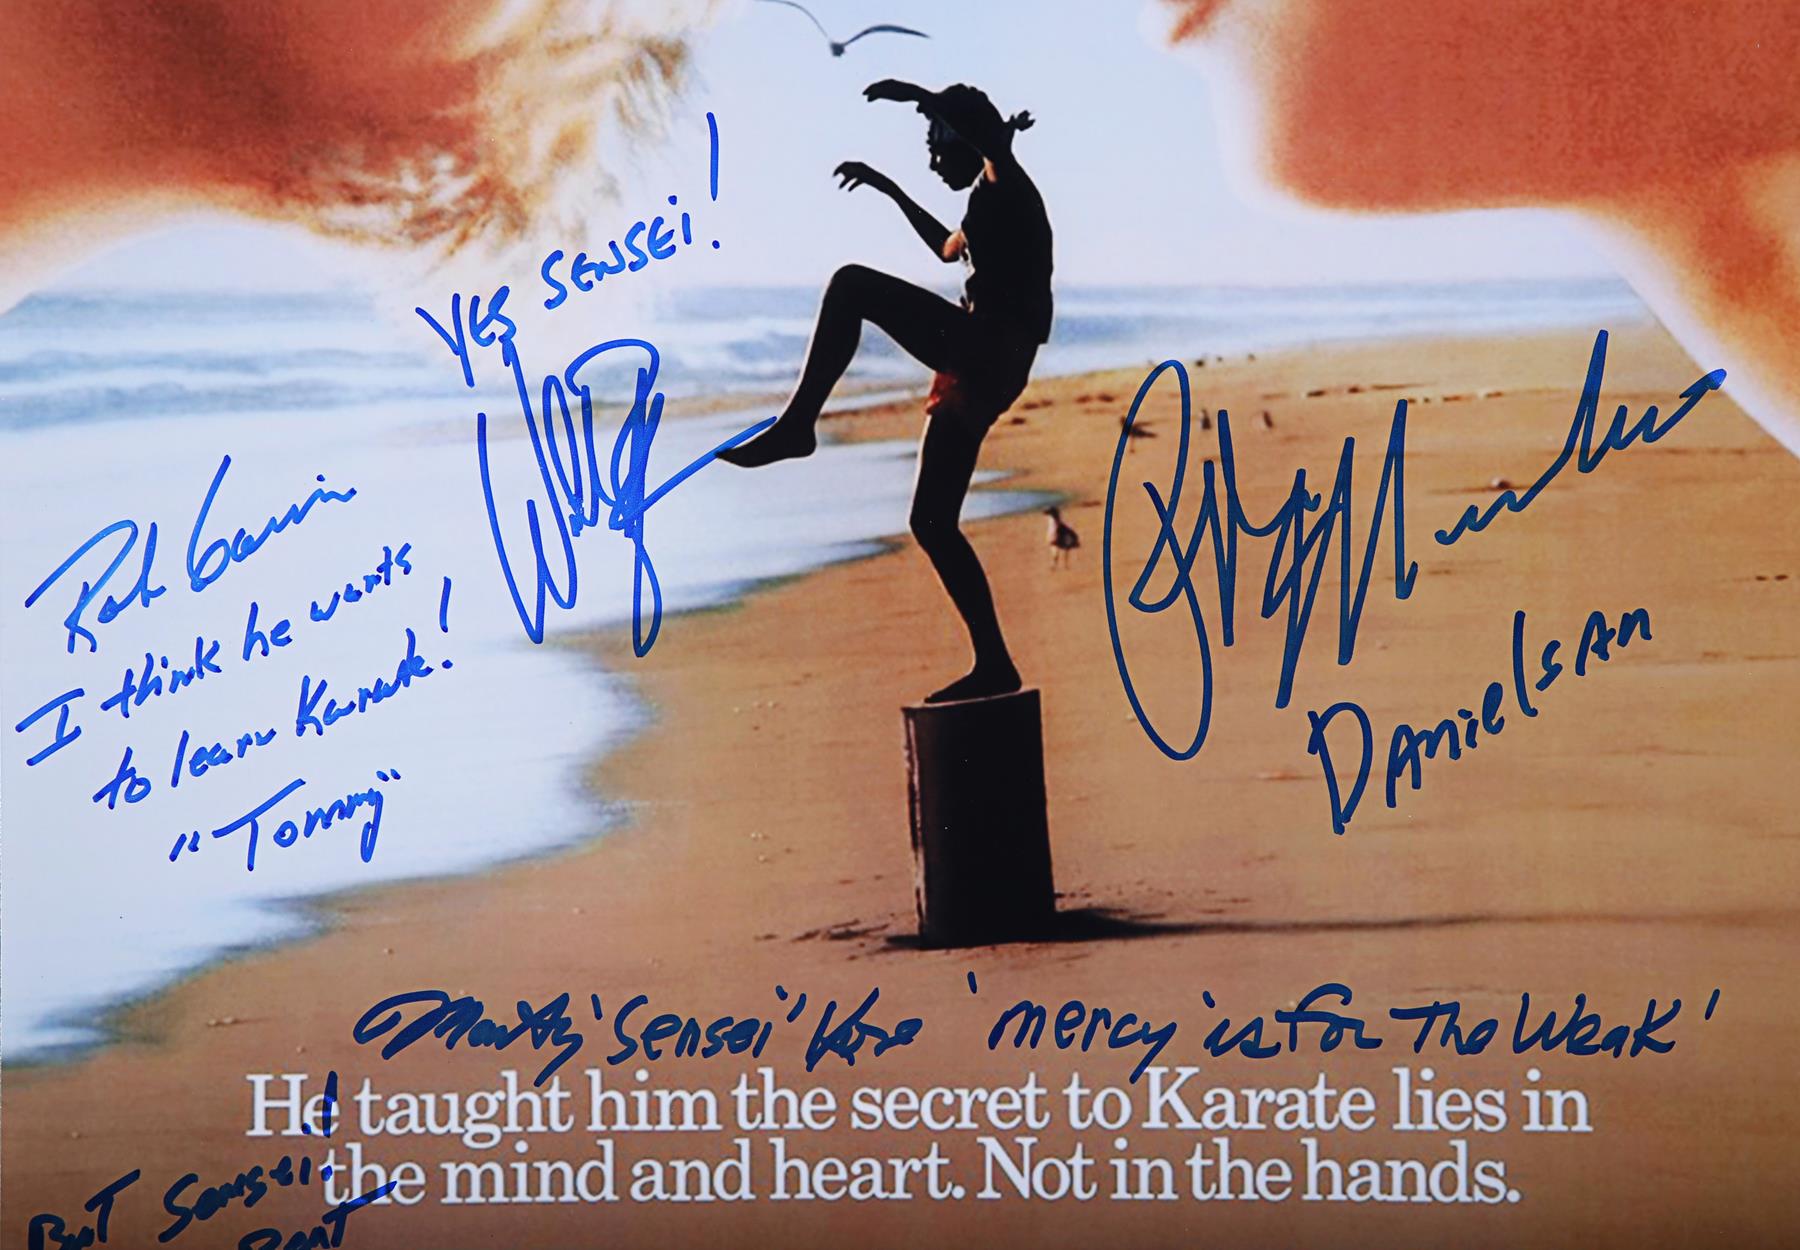 THE KARATE KID (1984) - Autographed Poster, 1980's - Image 2 of 5